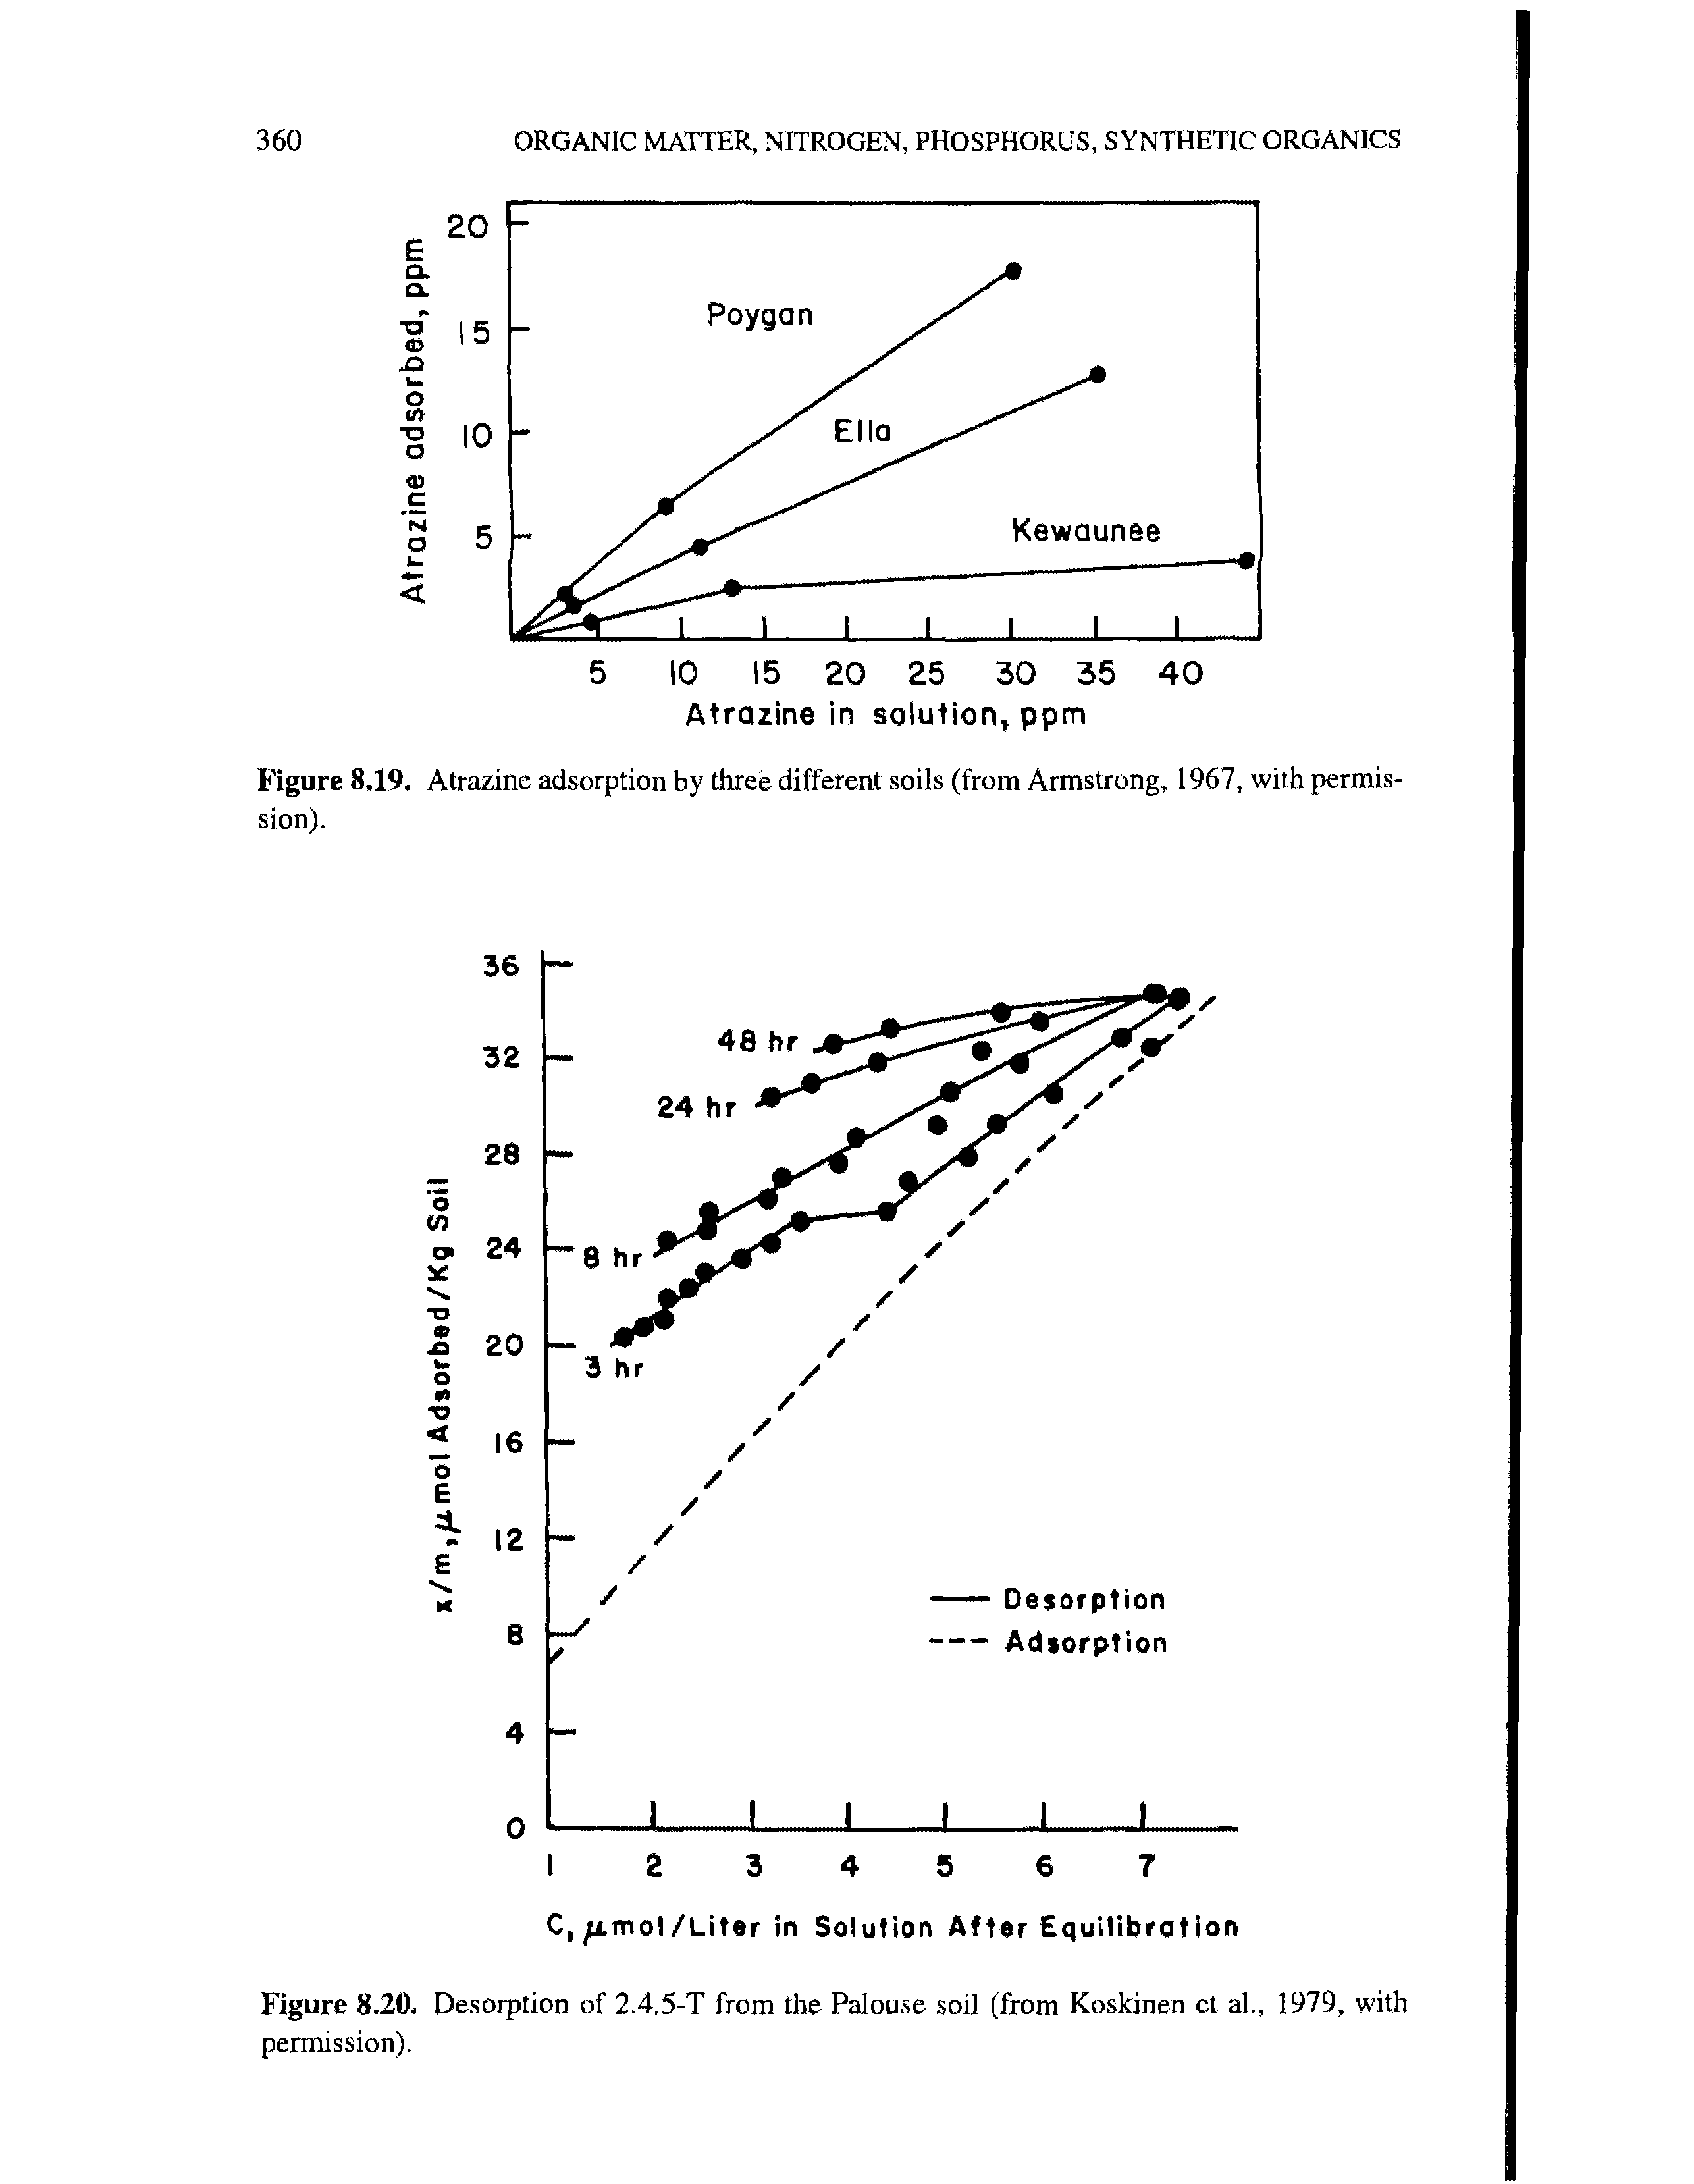 Figure 8.19. Atrazine adsorption by three different soils (from Armstrong, 1967, with permission).